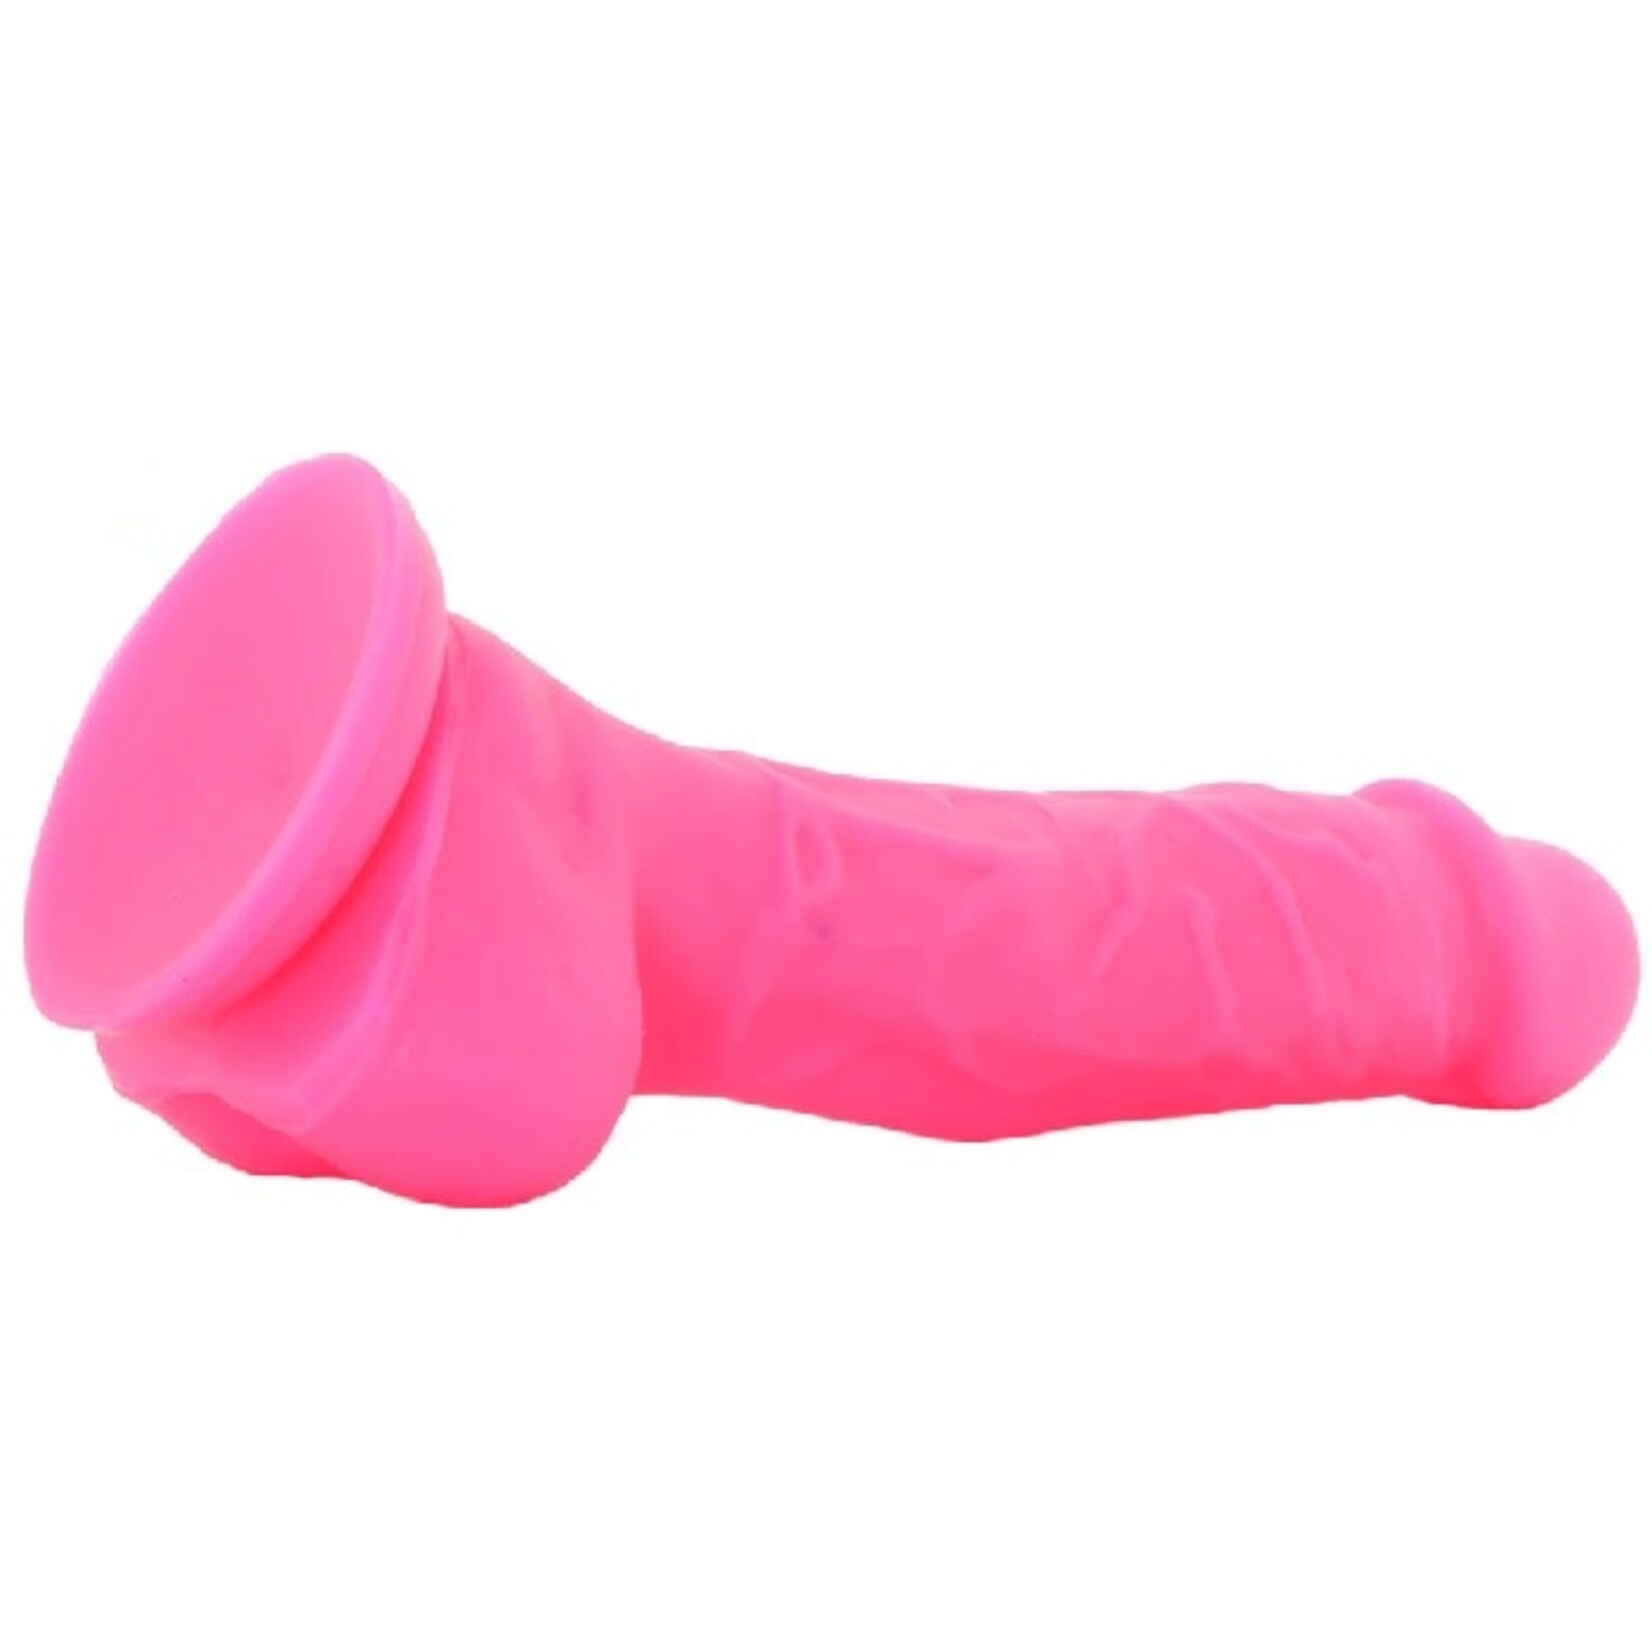 NSNOVELTIES COLOURS 5 INCH DUAL DENSITY SILICONE DILDO IN PINK